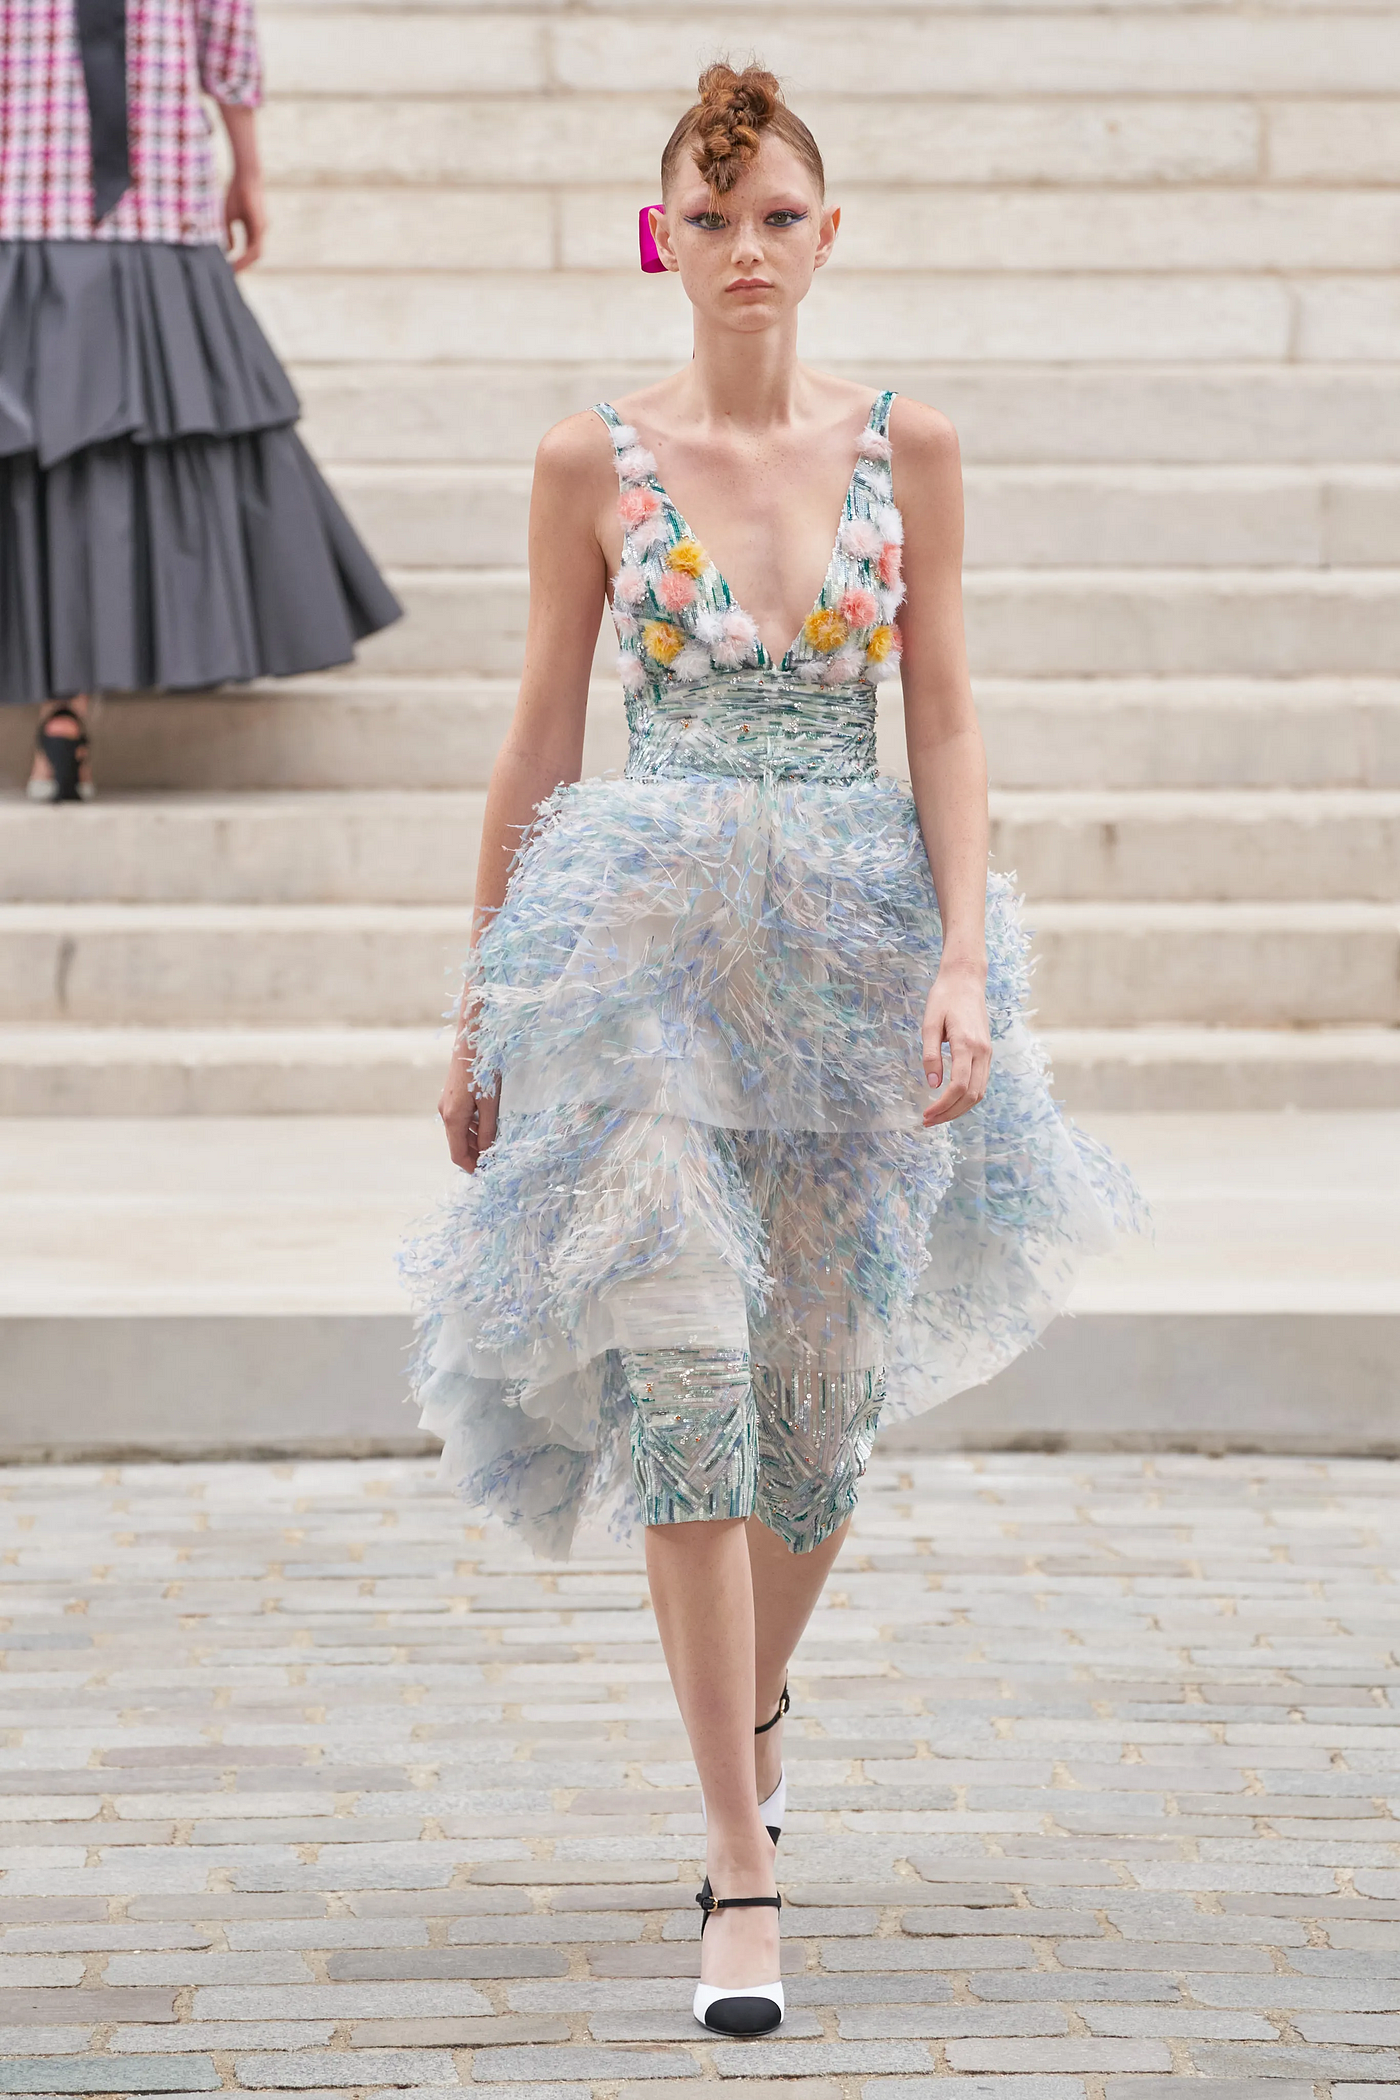 How Impressionism Inspired Chanel's Autumn/Winter 2021 Haute Couture Show